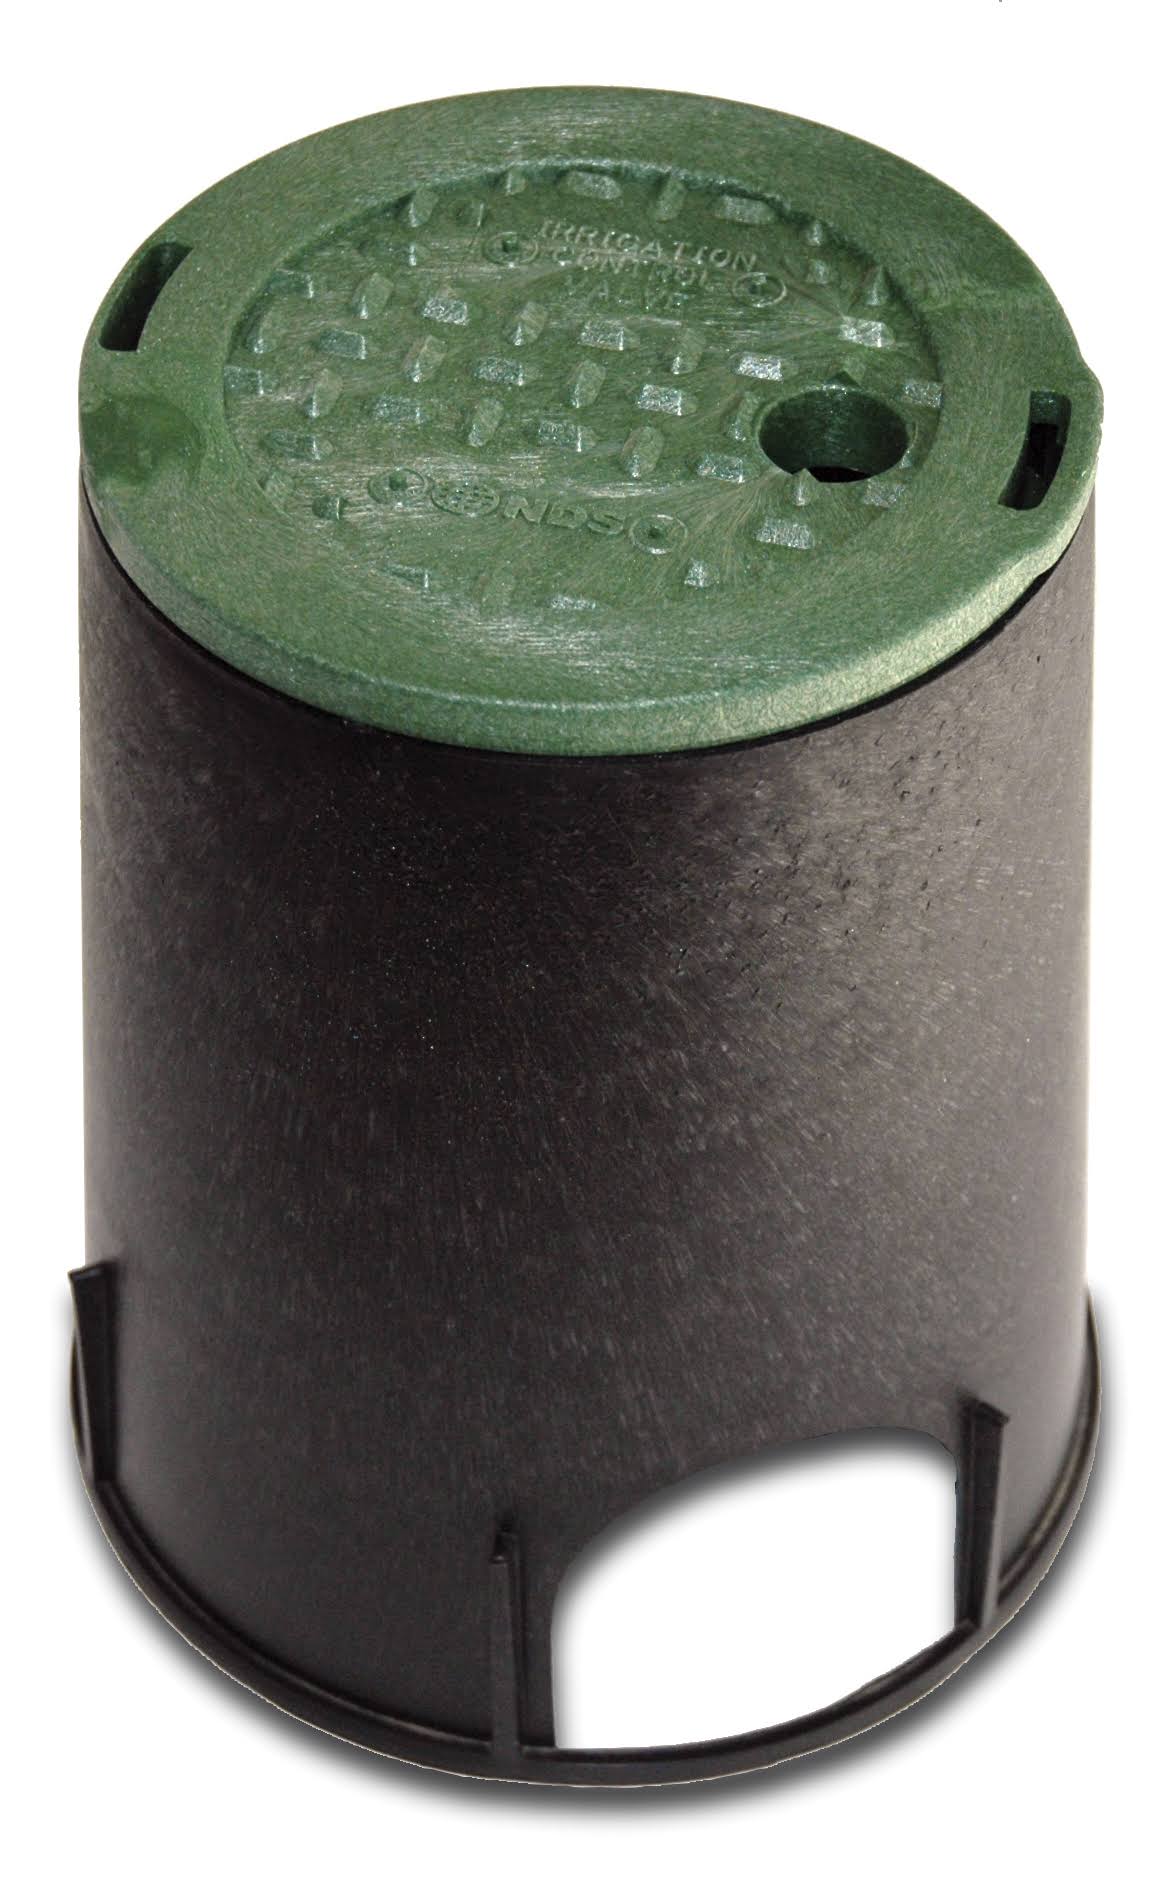 NDS Standard Series Round Valve Box Overlapping Cover-ICV - 6", Black and Green